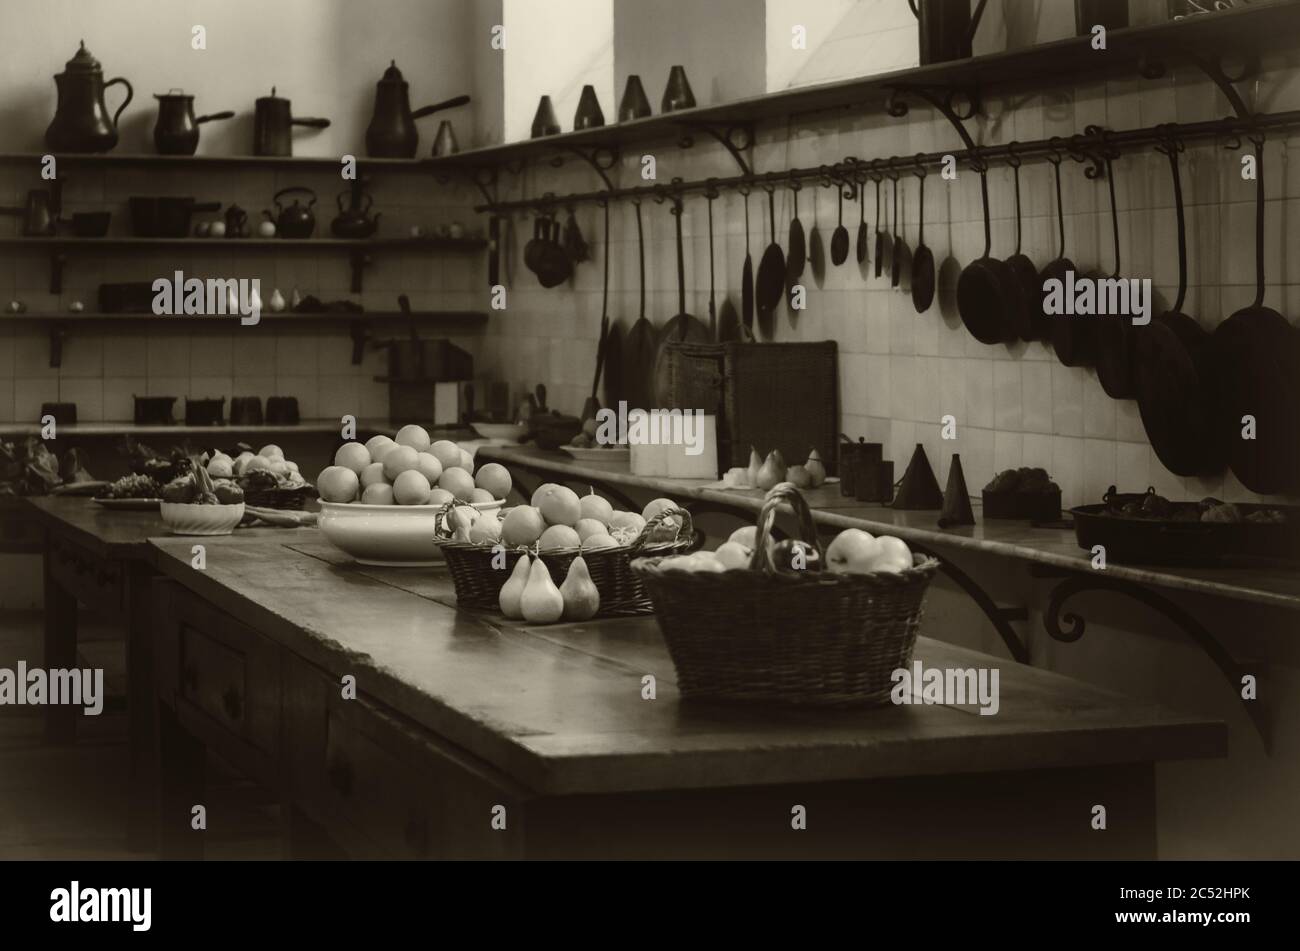 vintage looking image of an antique XIX century old kitchen with tools, pans, pots and food ingredients all over che benches and tables Stock Photo